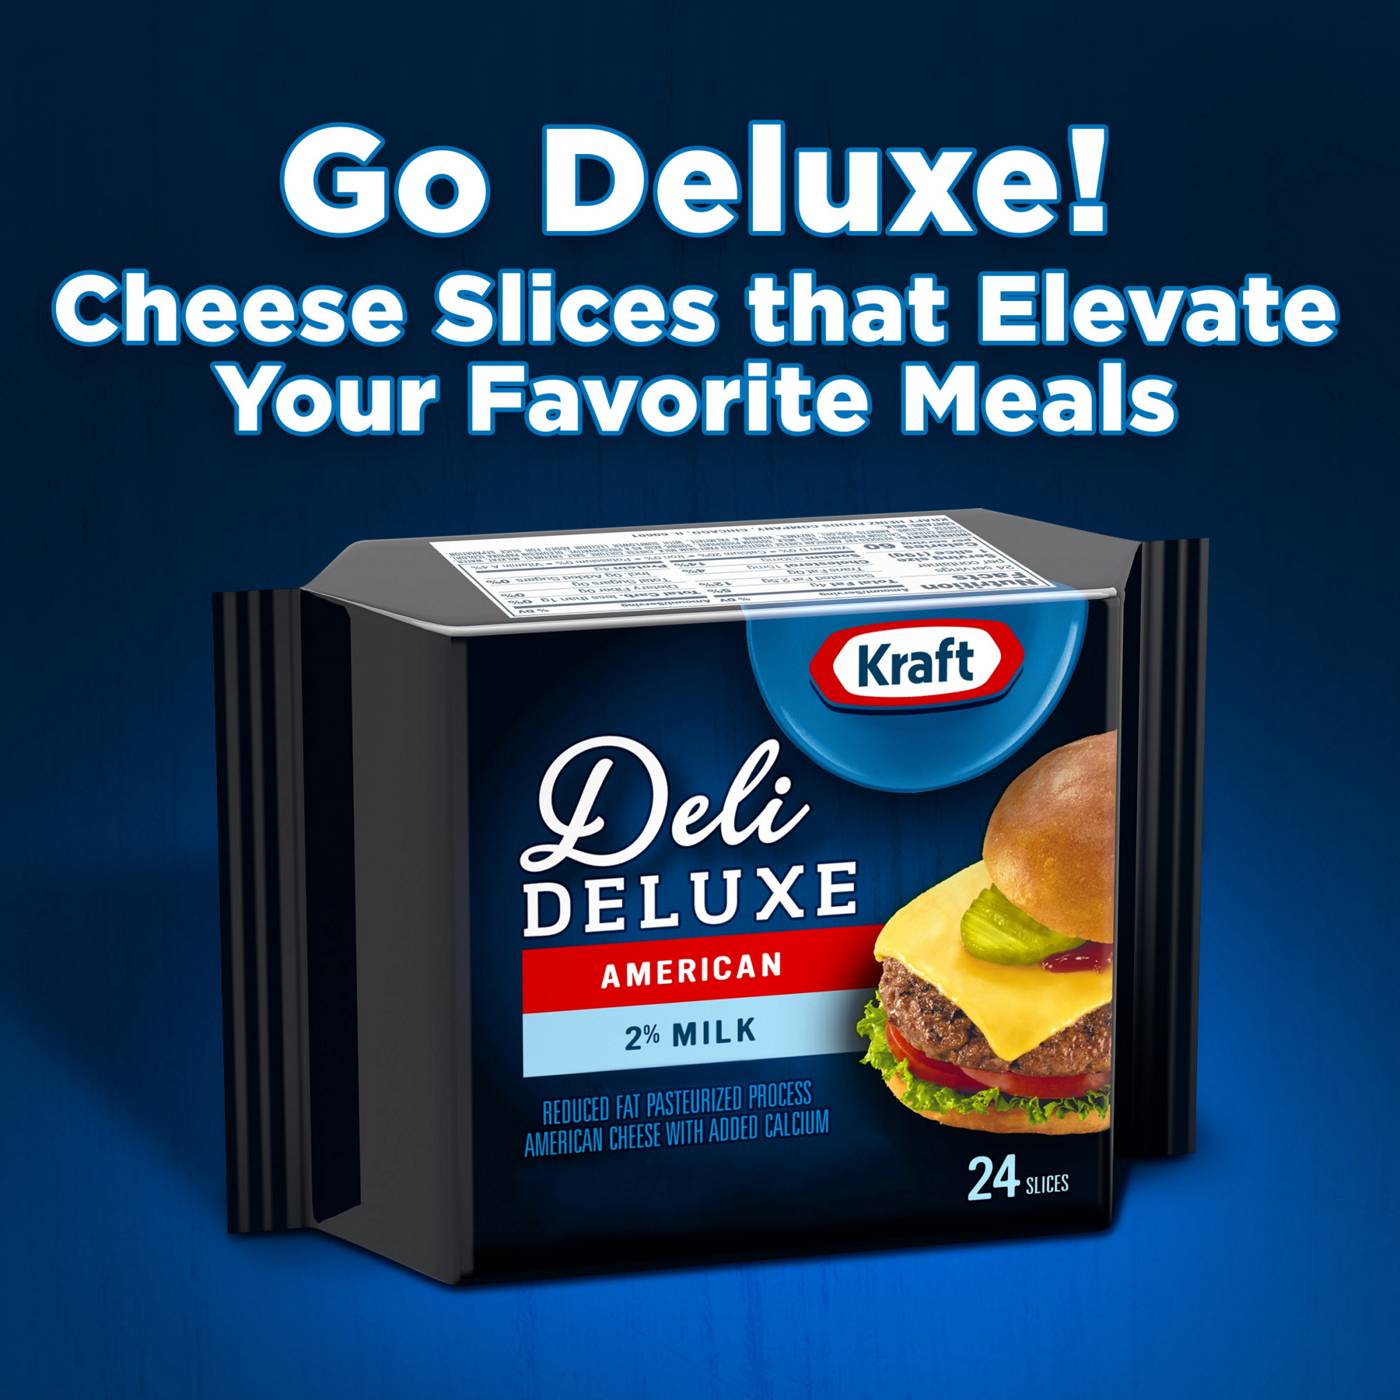 Kraft Deli Deluxe Reduced Fat American Cheese, Slices; image 5 of 6